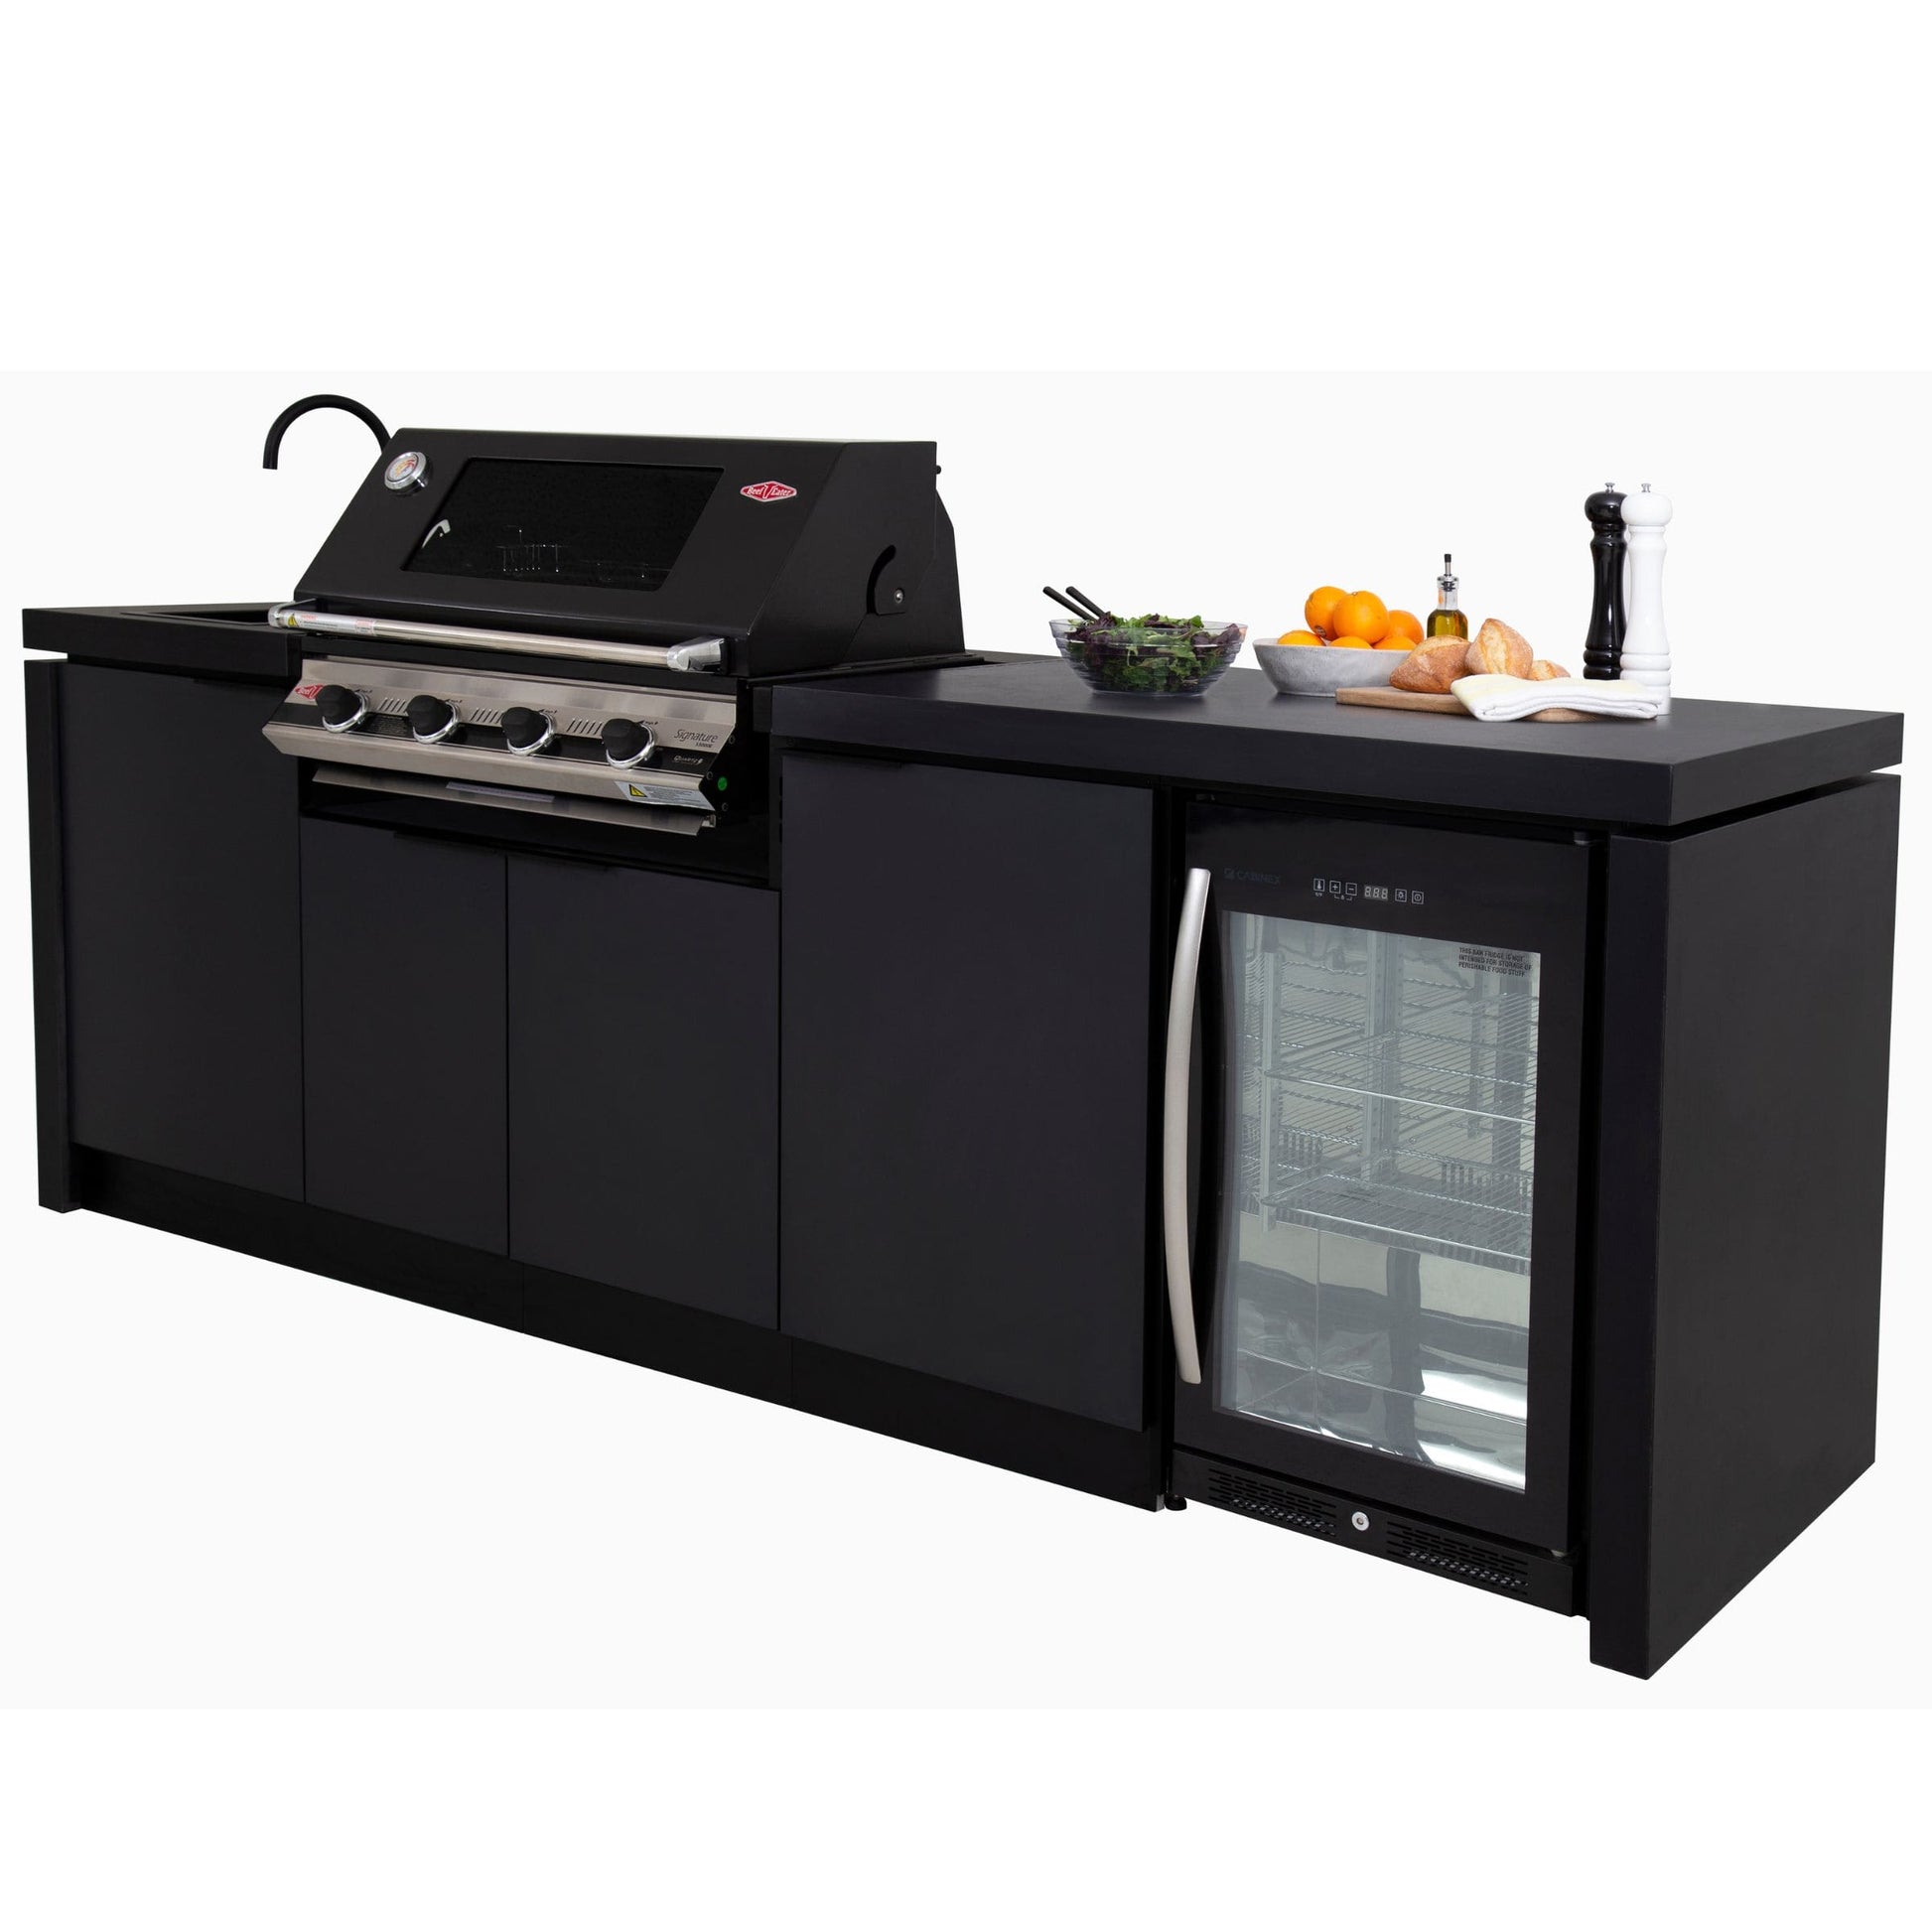 Cabinex Classic with BeefEater 4 Burner 3000E BBQ with fridge